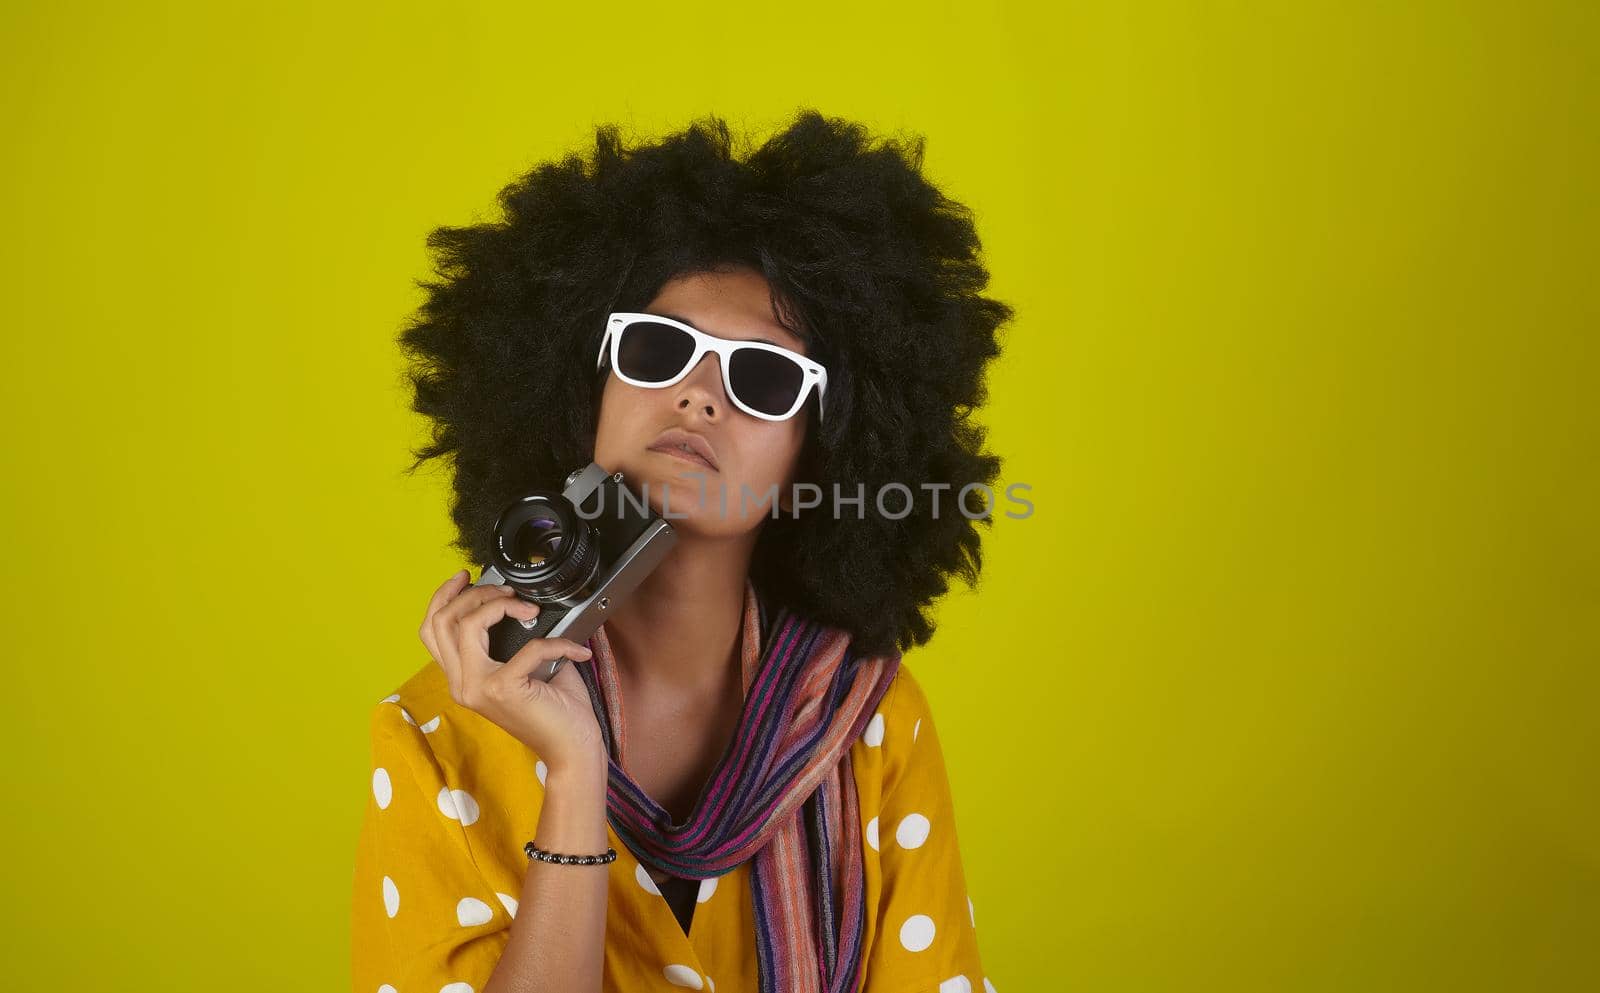 A beautiful woman with curly afro hairstyle holkding a retro film camera on yellow background